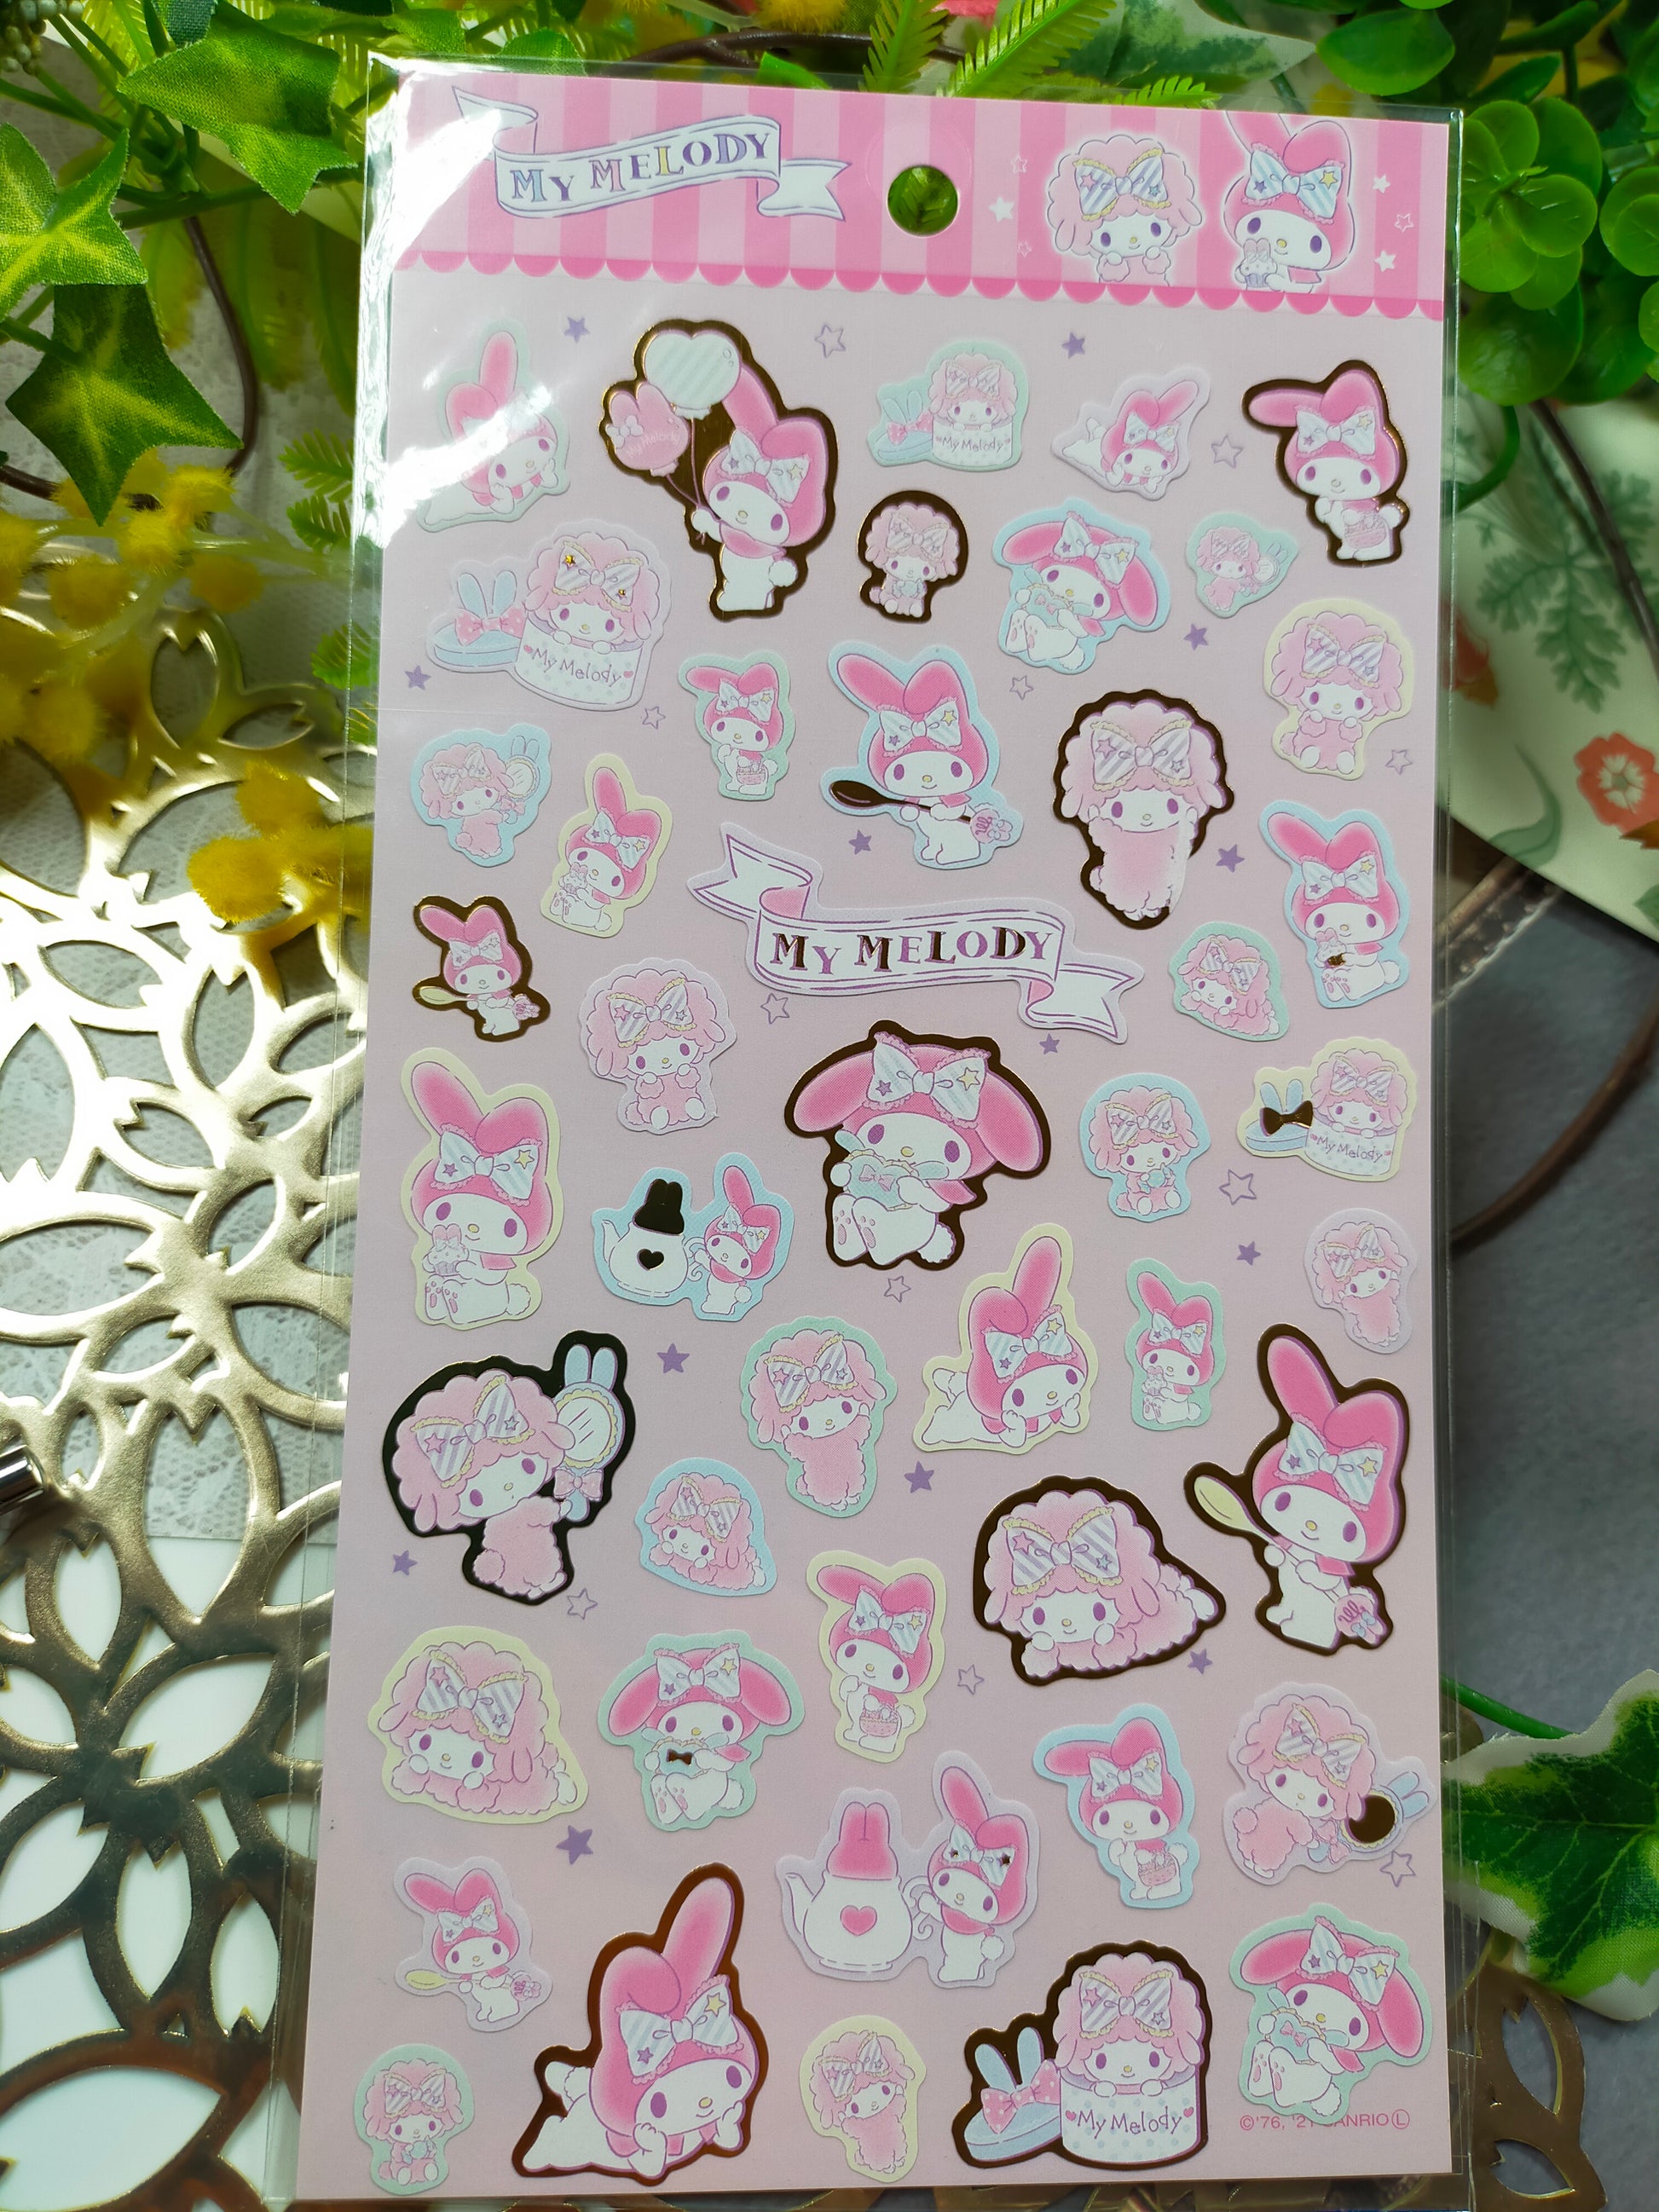 Sanrio characters Big sticker 2021_ Hello Kitty / Little Twin Stars / MY MELODY / POMPOMPURIN / SANRIO CHARACTERS